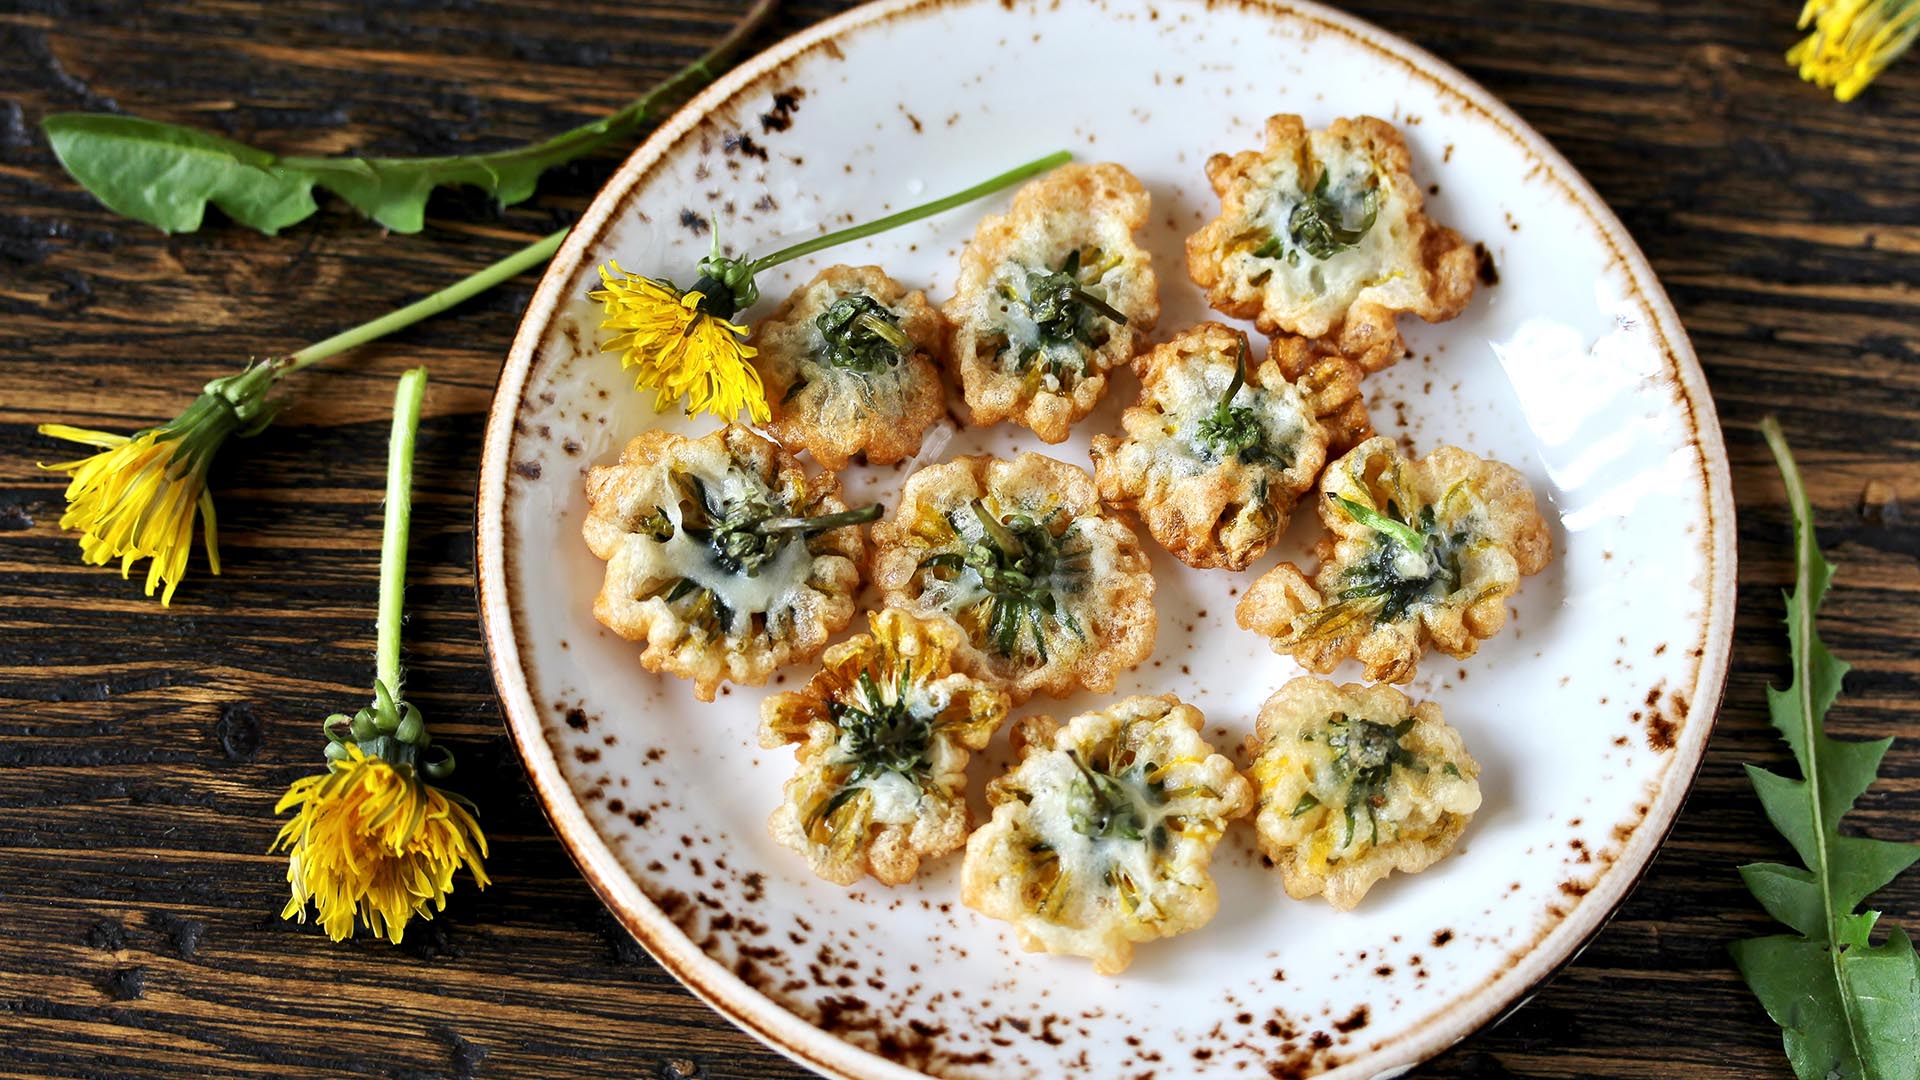 Overhead view of white, round plate with fried dandelions on a wooden service. 